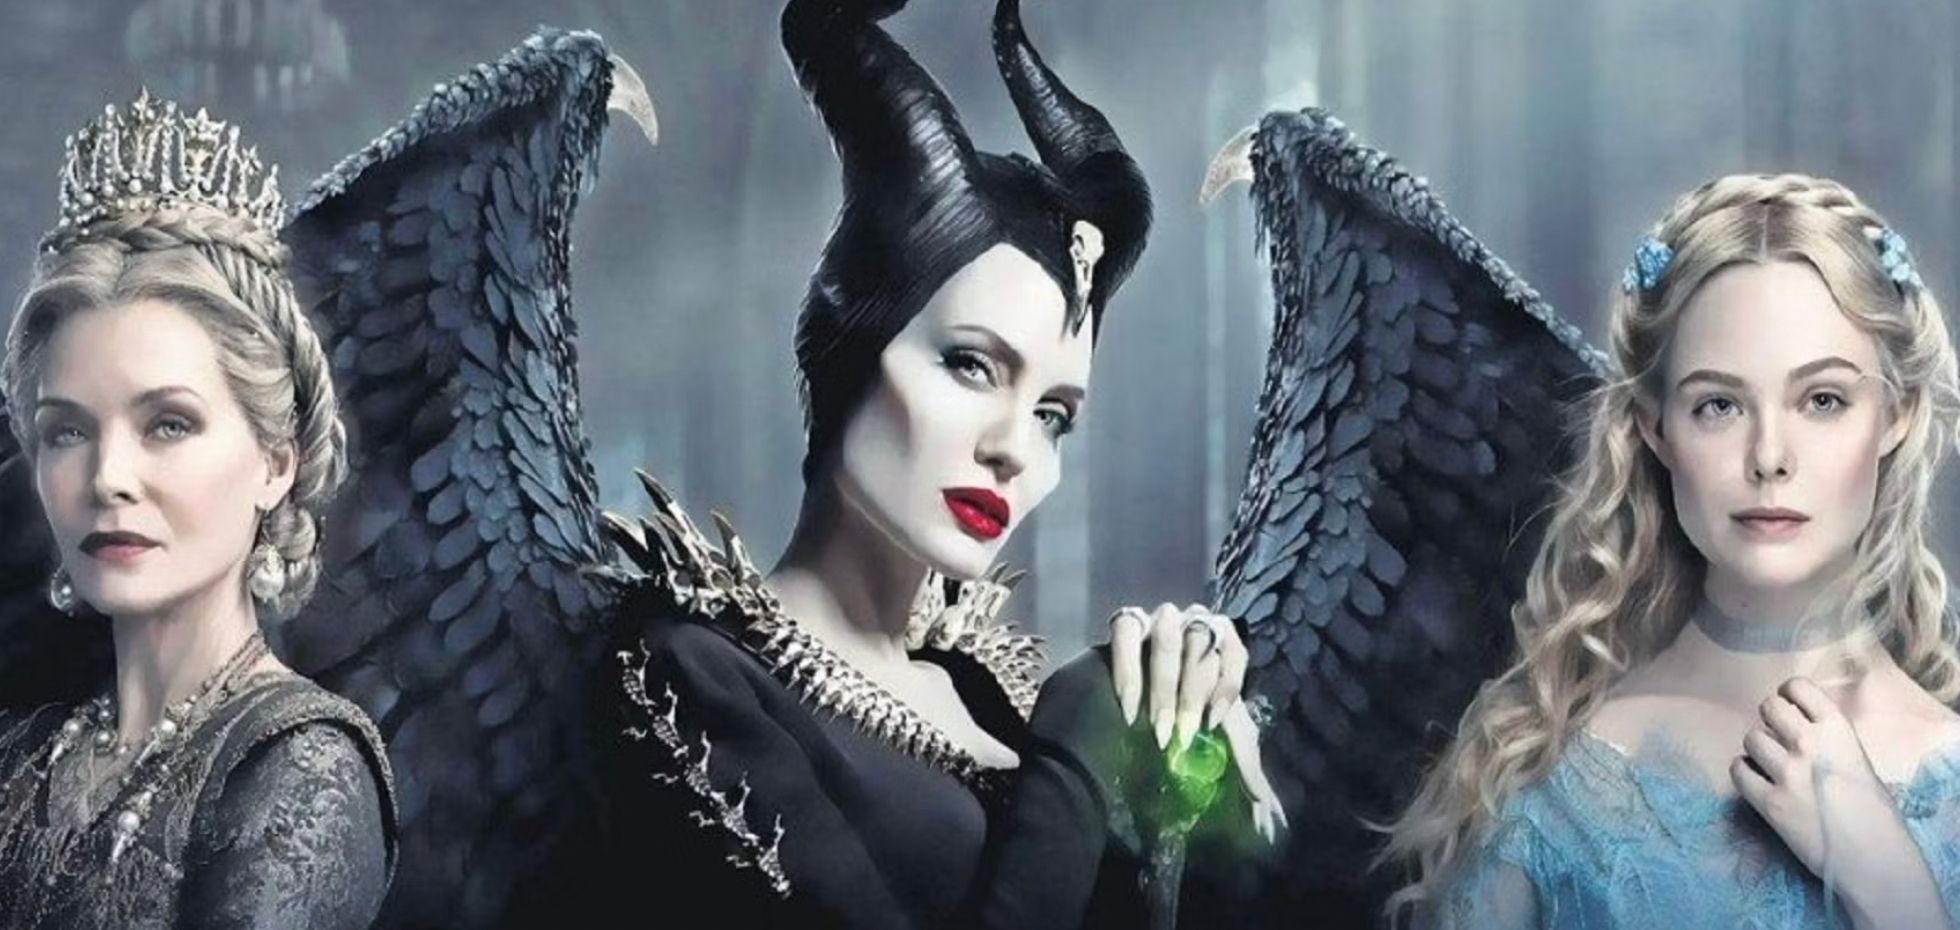 Michelle Pfeiffer, Angelina Jolie, and Elle Fanning in Maleficent: Mistress of Evil